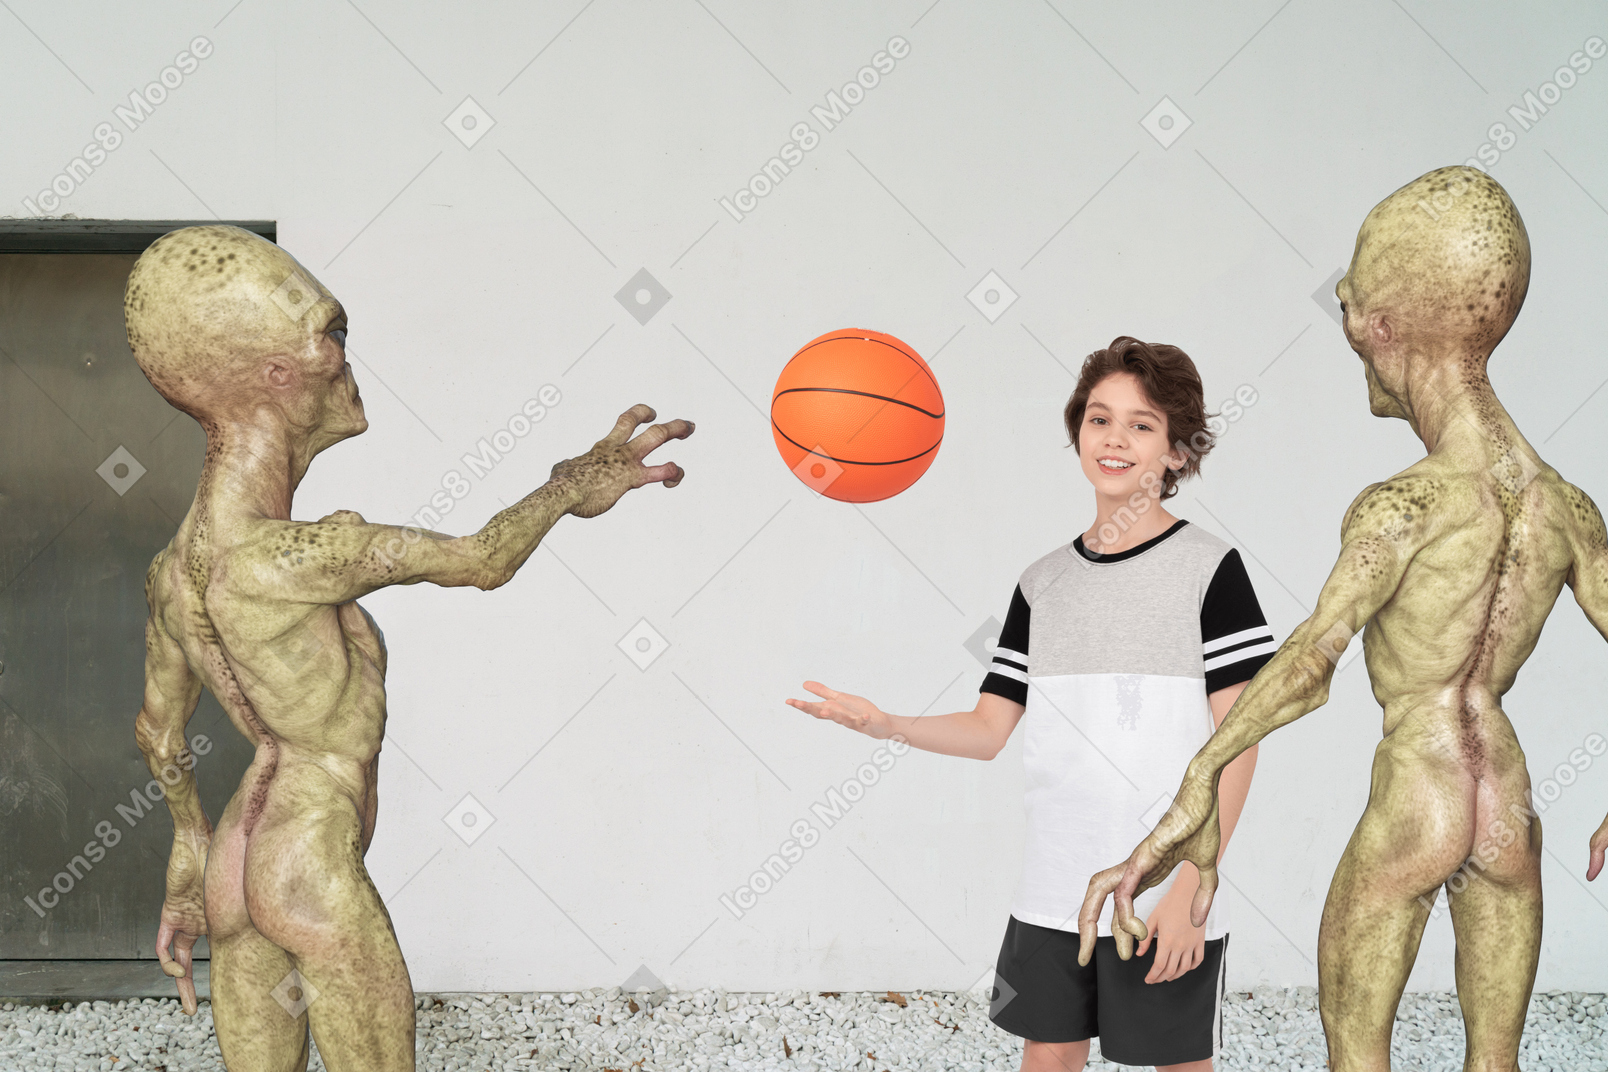 Aliens playing basketball with a boy